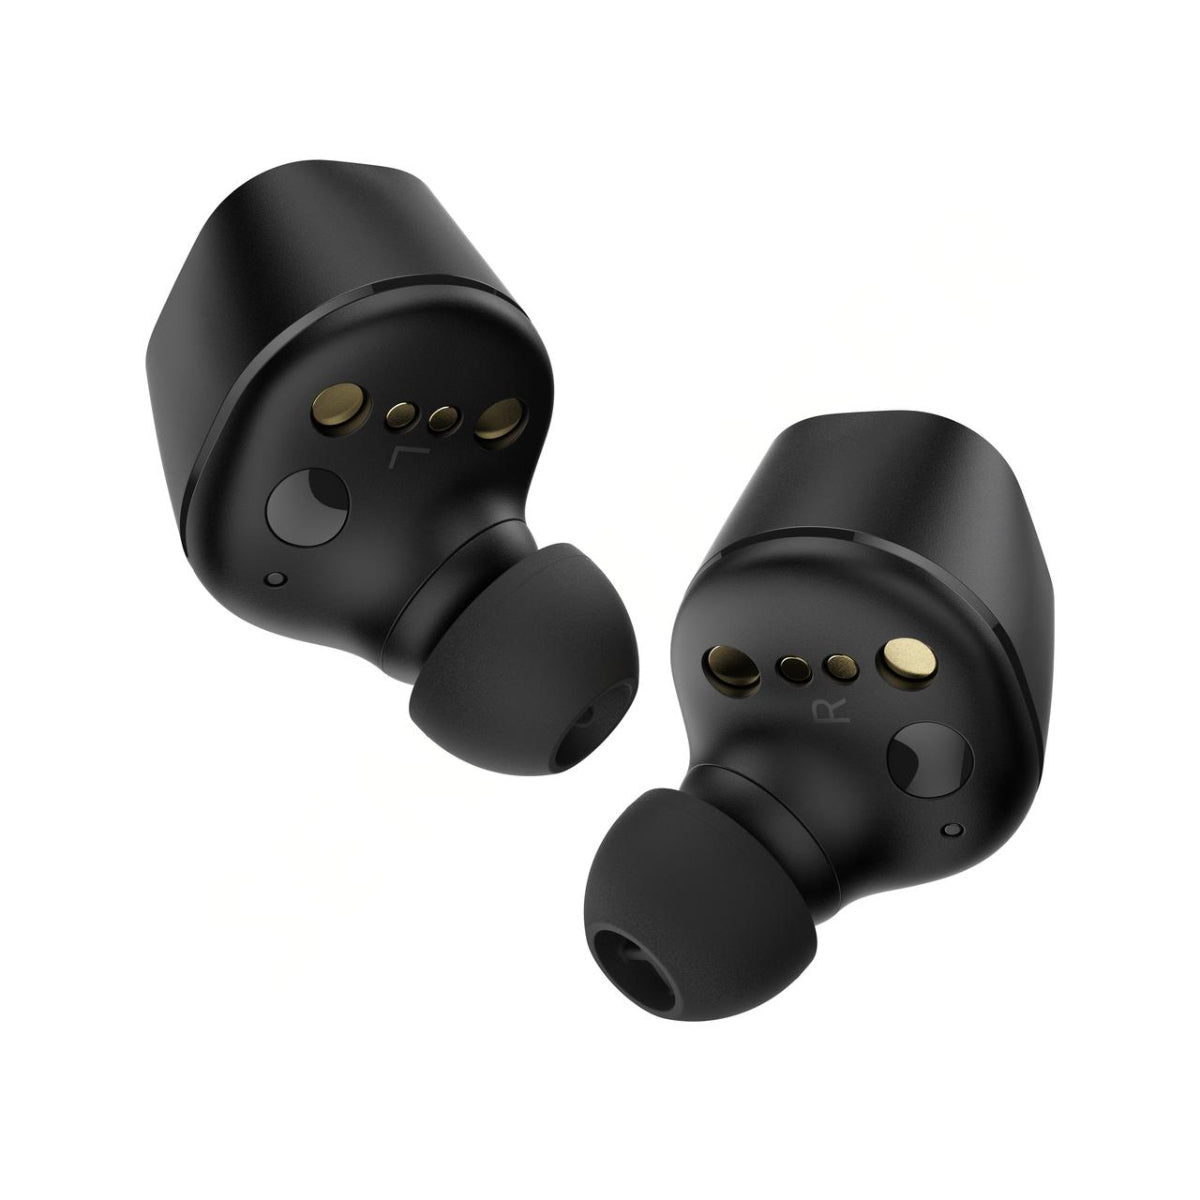 Sennheiser CX PLUS True Wireless Earbuds with Active Noise Cancellation - Black